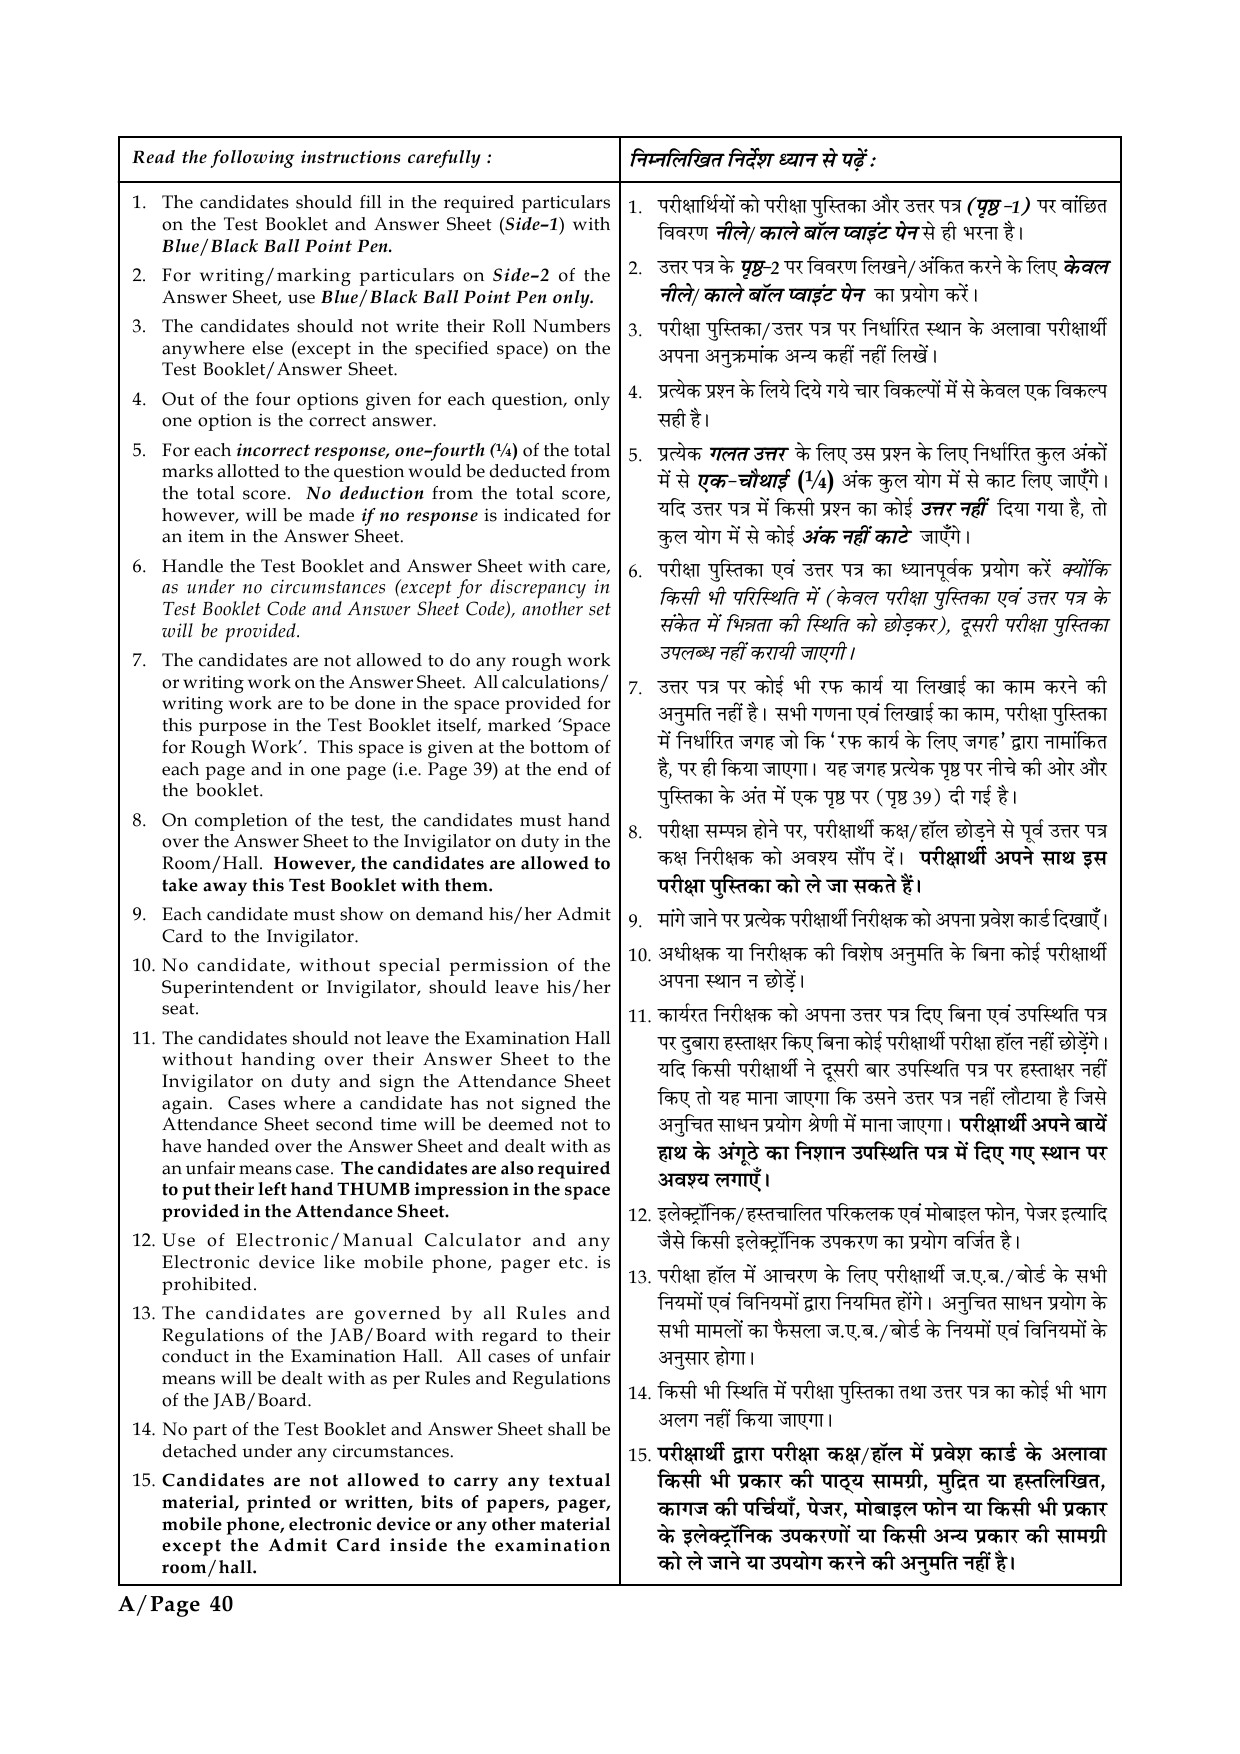 JEE Main Exam Question Paper 2015 Booklet A 39